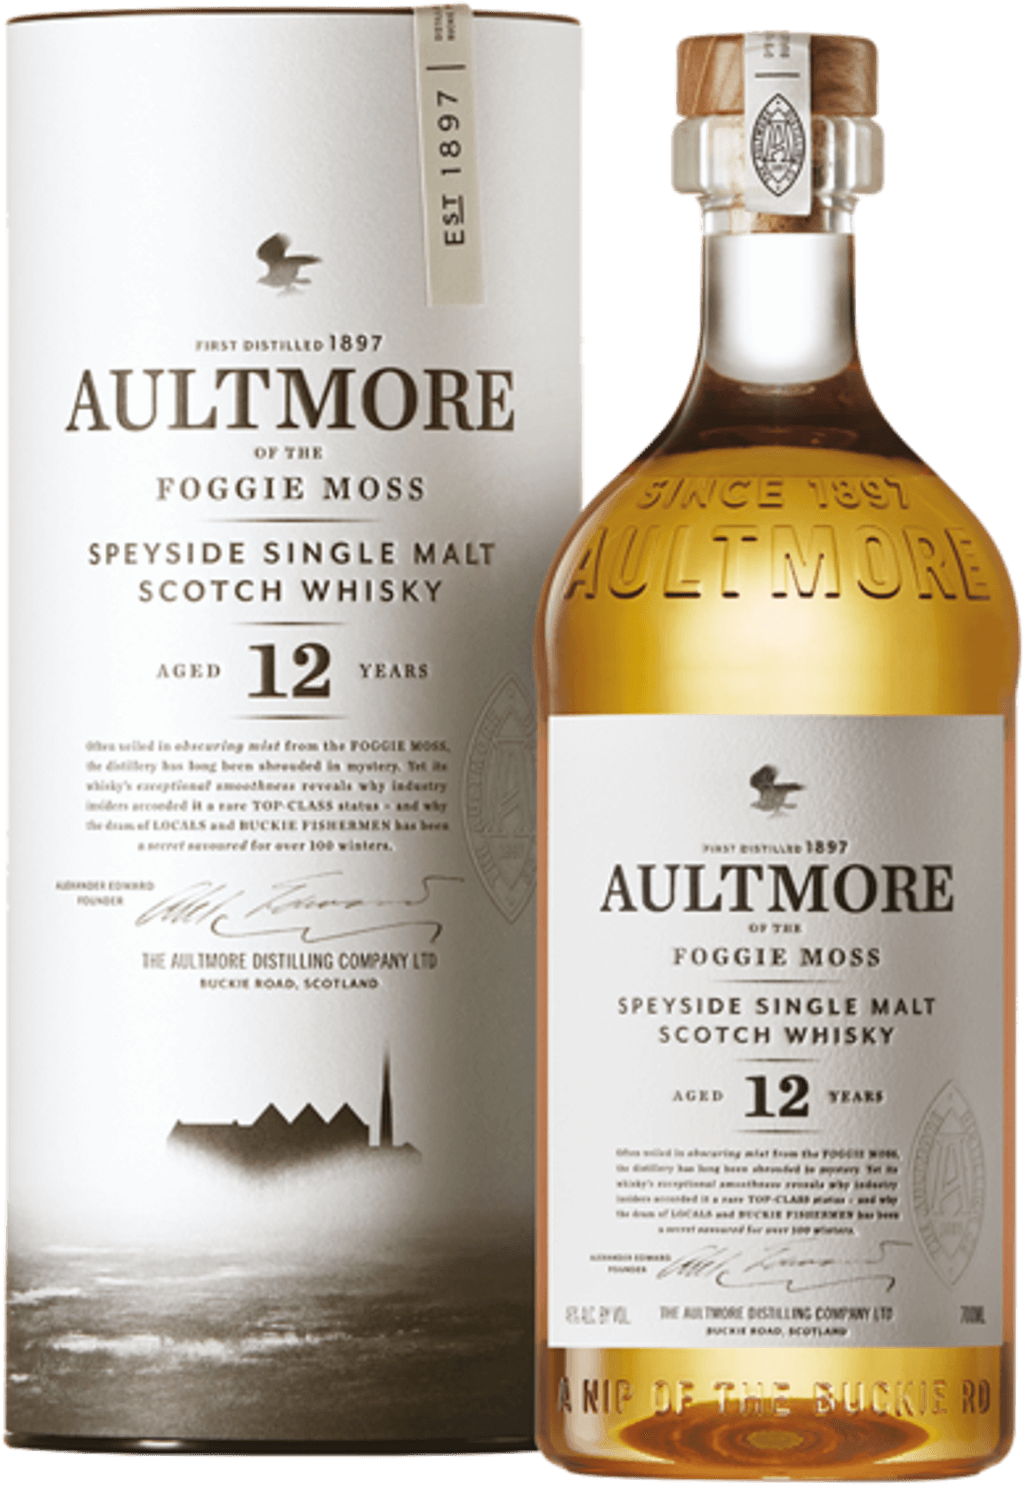 Aultmore 12 Years Old Speyside Single Malt Scotch Whisky (gift box) craigellachie 13 years old speyside single malt scotch whisky gift box